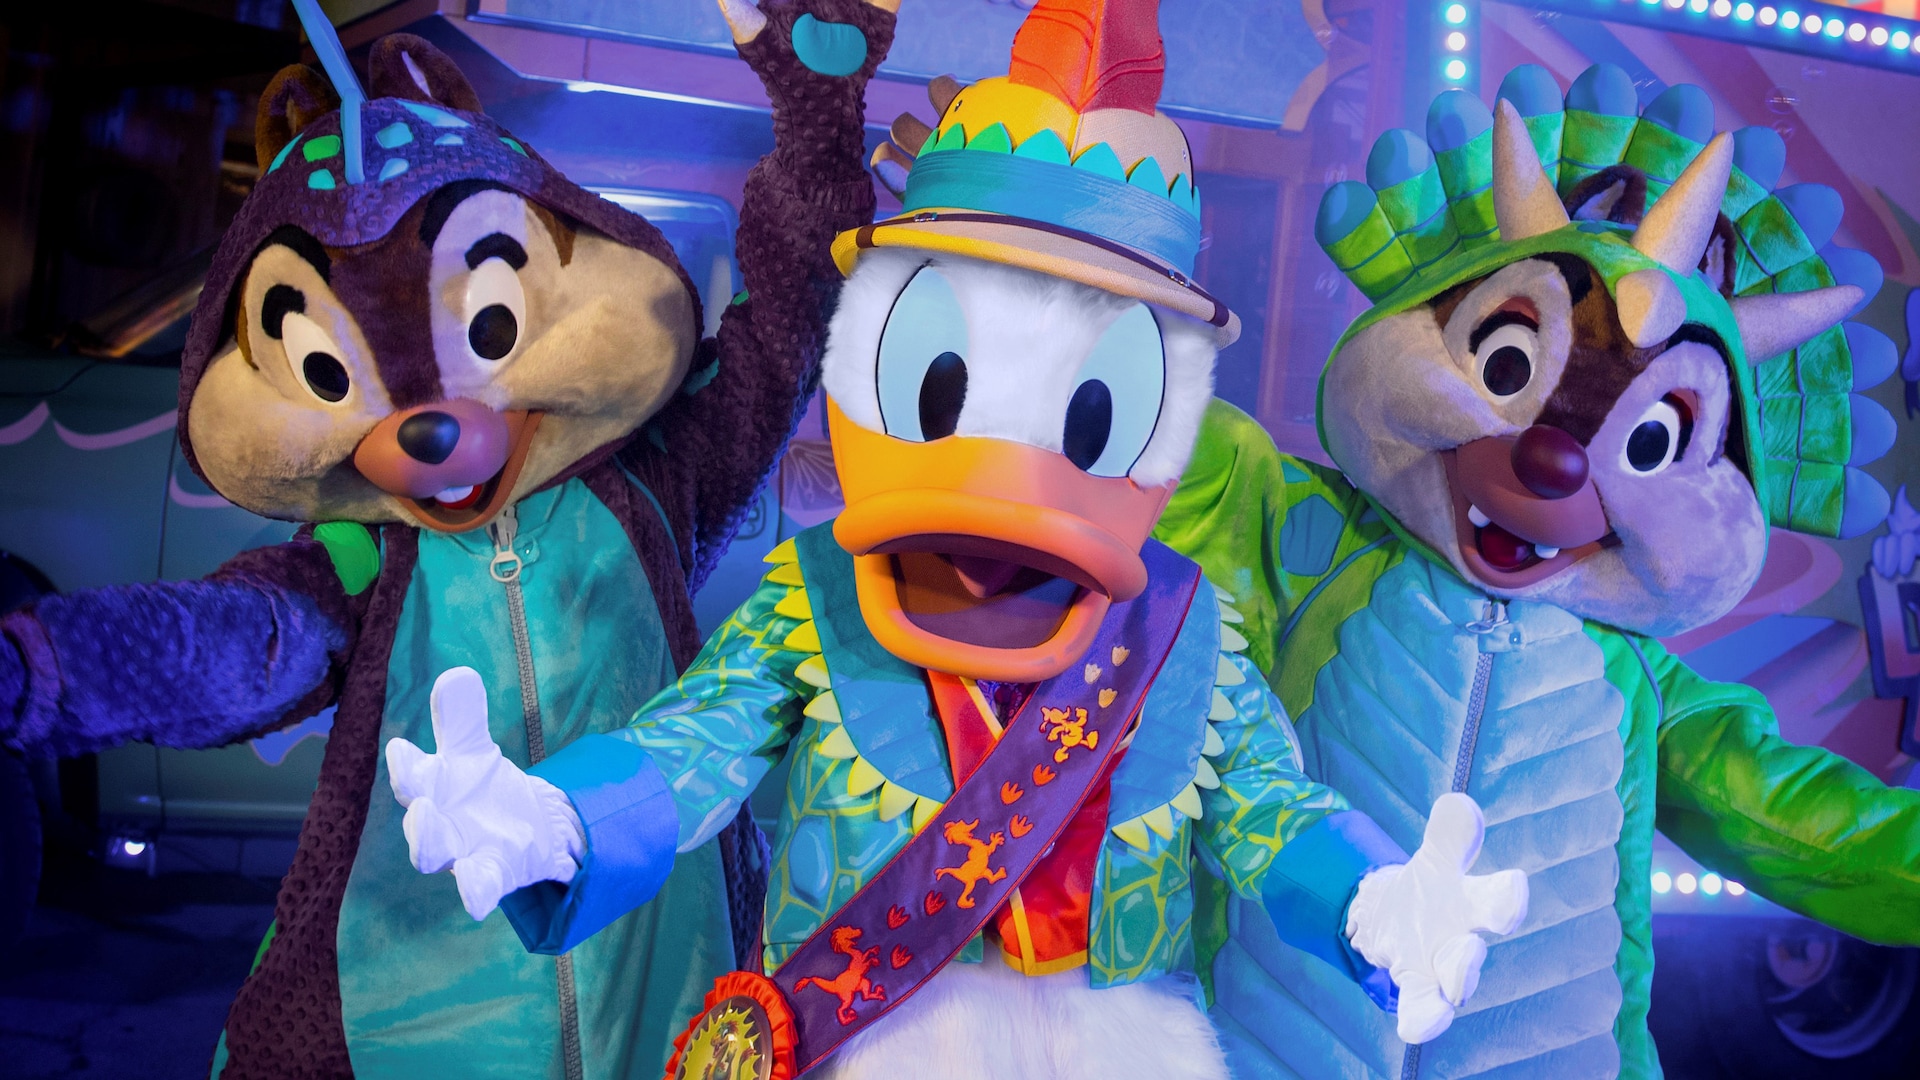 Chip and Dale dressed up as dinosaurs stand next to Donald Duck dressed in a safari outfit